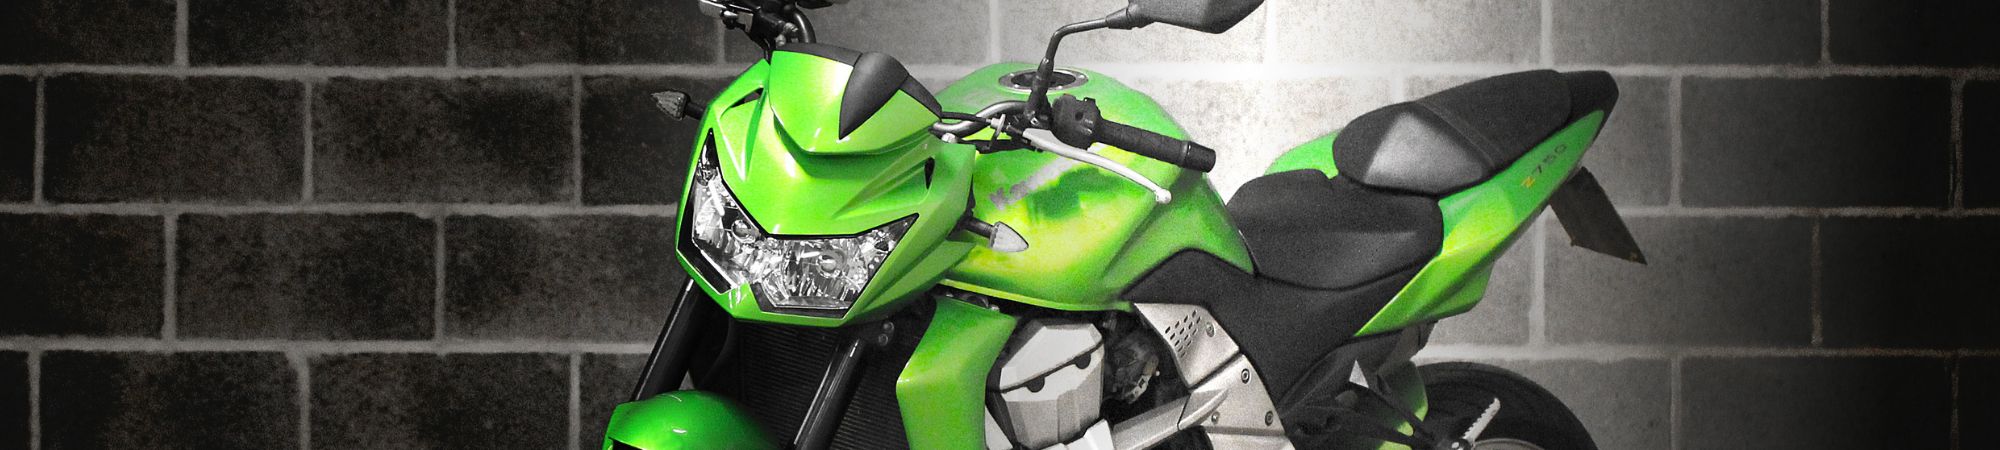 Prepare a Motorcycle After Winter Storage